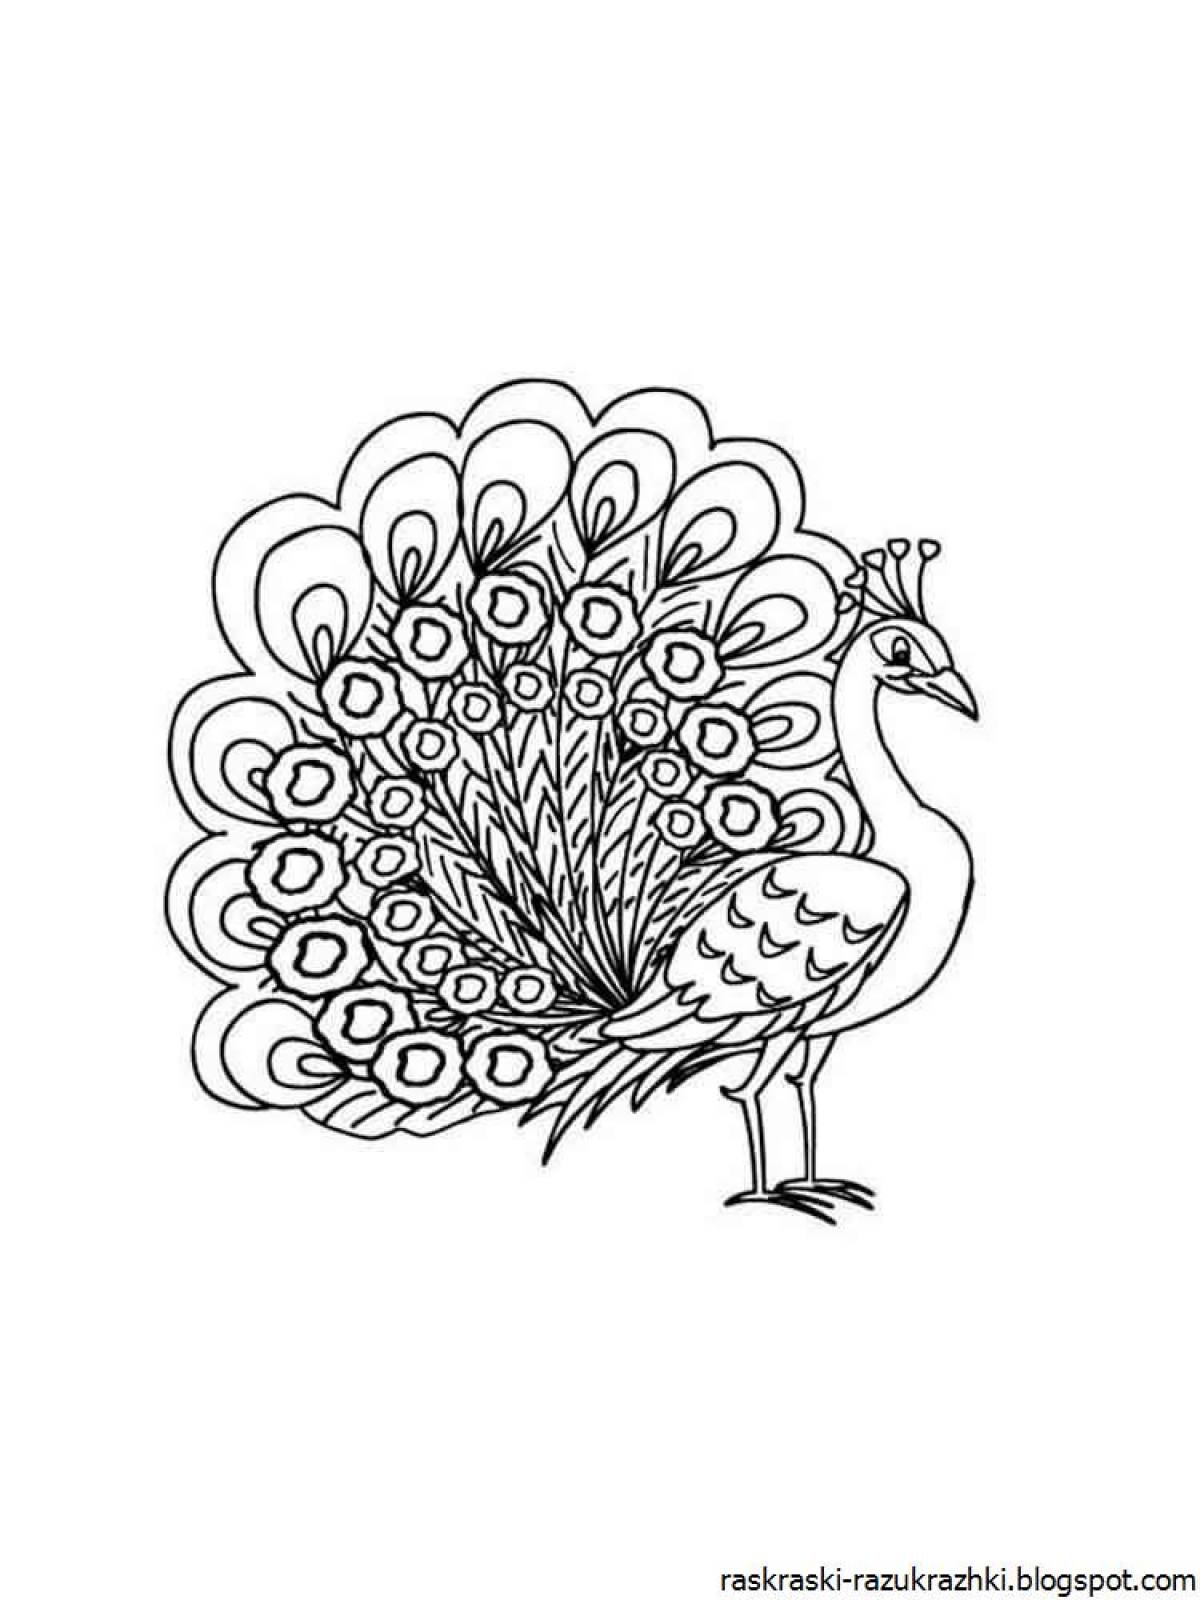 A wonderful peacock coloring book for kids